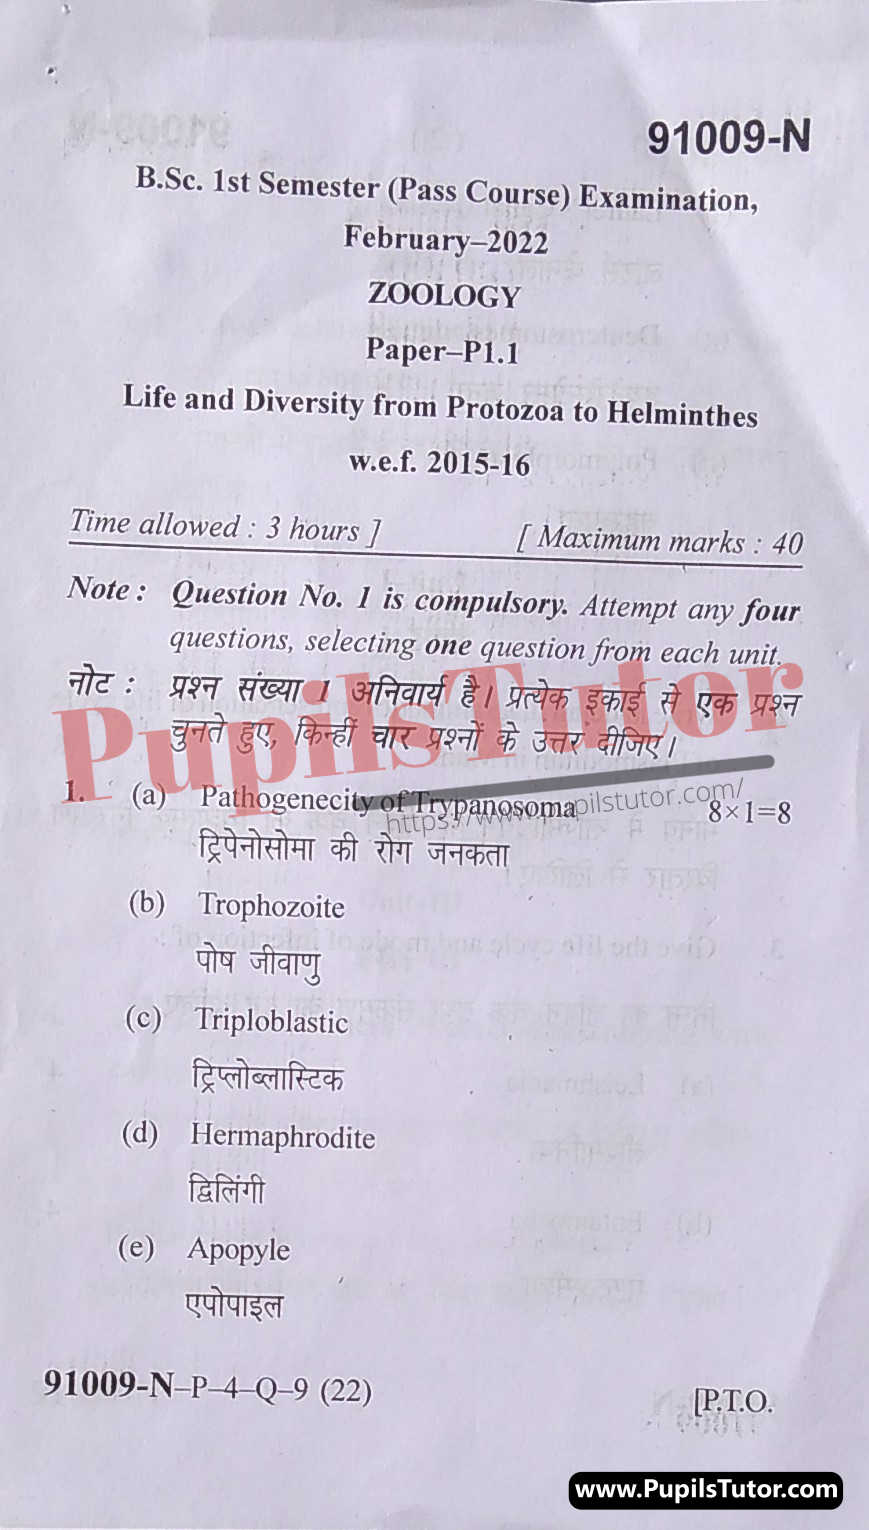 MDU (Maharshi Dayanand University, Rohtak Haryana) BSc Zoology Pass Course First Semester Previous Year Life And Diversity From Protozoa To Helminthes Question Paper For February, 2022 Exam (Question Paper Page 1) - pupilstutor.com